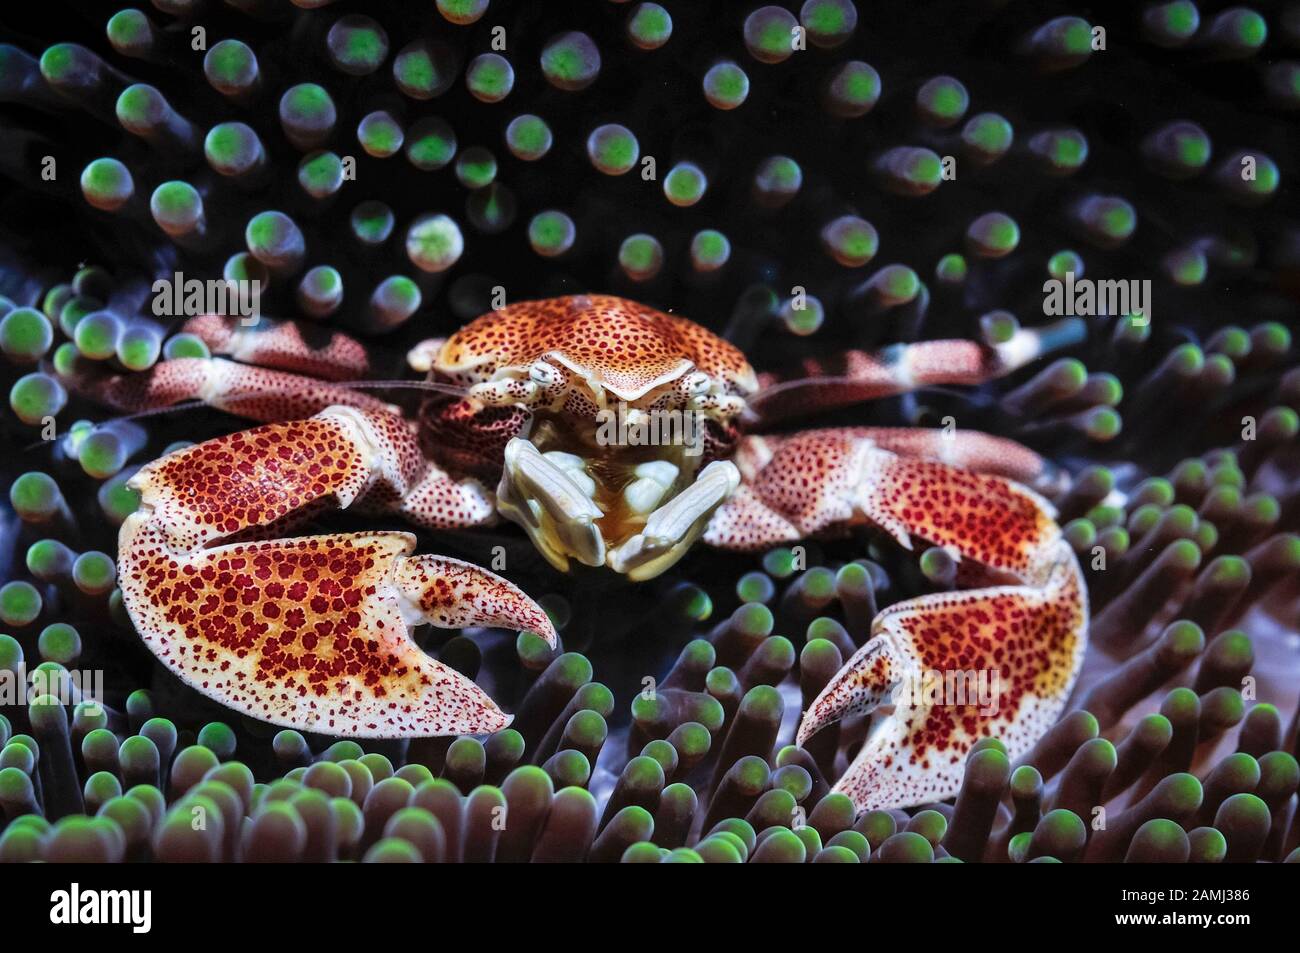 red-spotted porcelain crab, Neopetrolisthes oshimai, Komodo National Park, Indonesia, Flores Sea, Indian Ocean Stock Photo